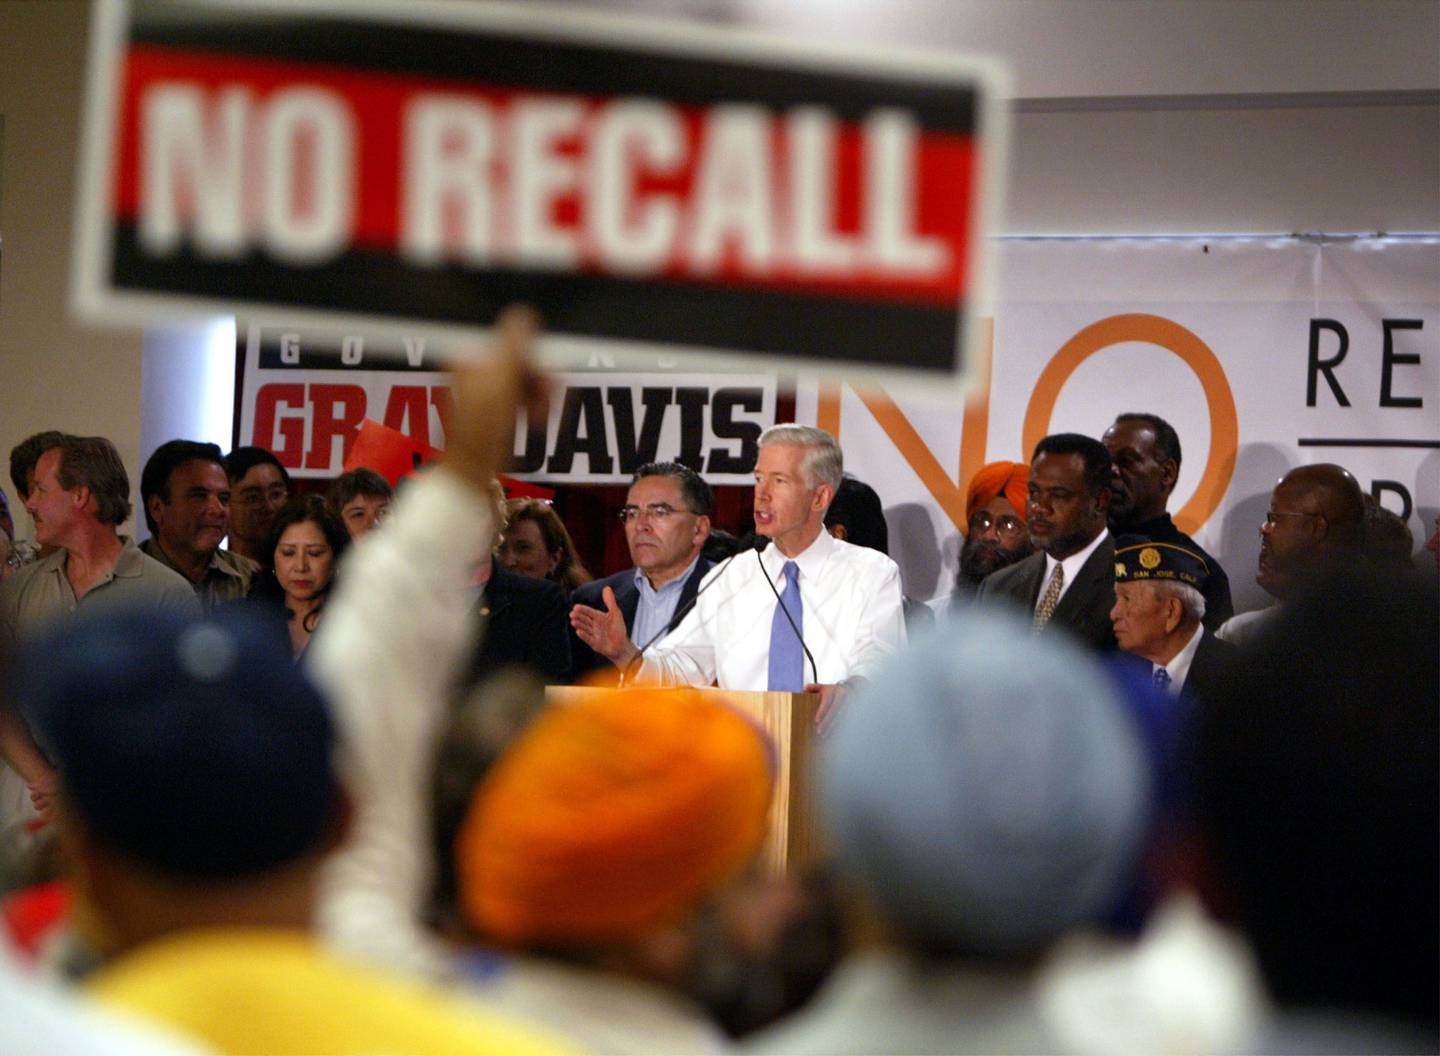 Gray Davis speaks at an anti-recall rally in San Jose, California, in 2003. Photographer: David McNew/Getty Images North Americadfd